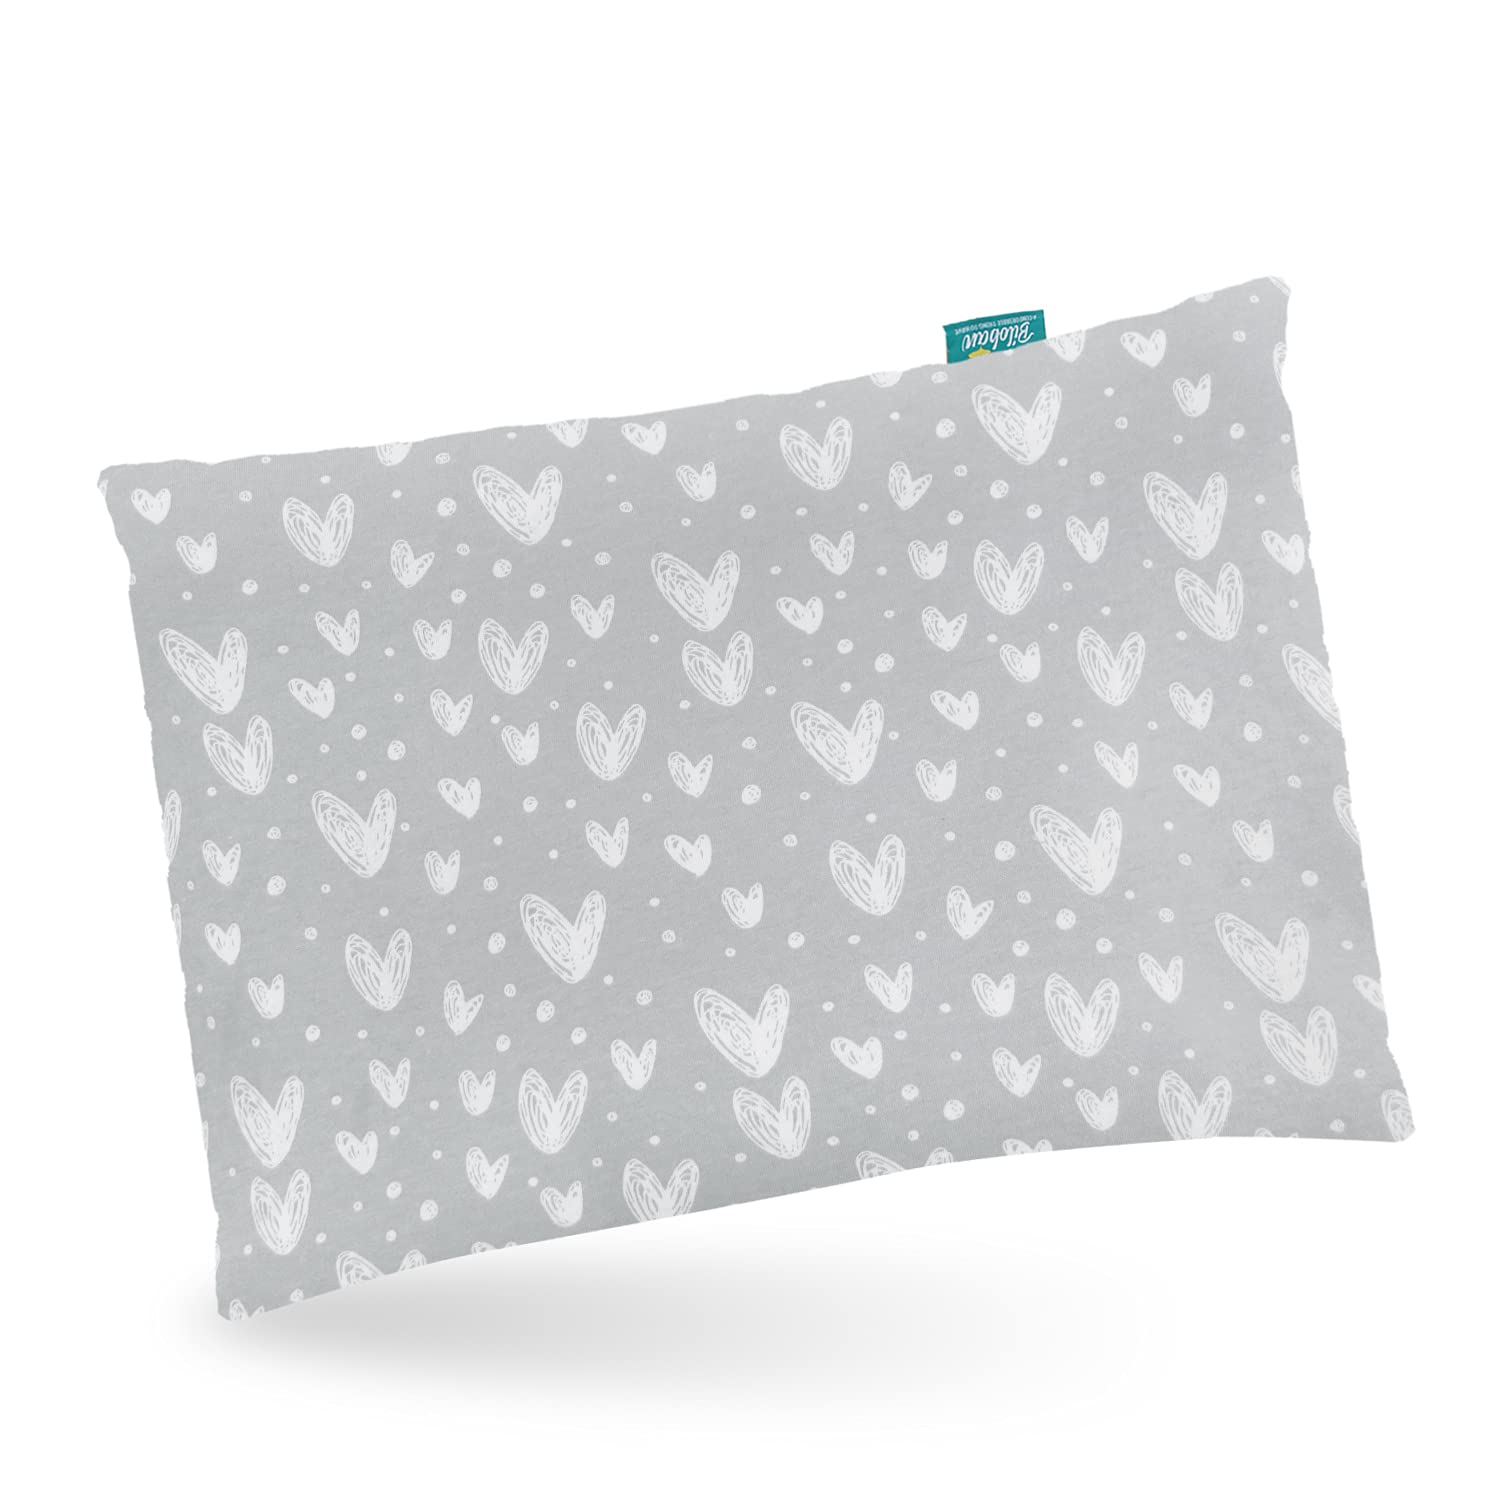 Toddler Pillow Quilted with Pillowcase - 13" x 18", 100% Cotton, Ultra Soft & Breathable, Grey Heart - Biloban Online Store